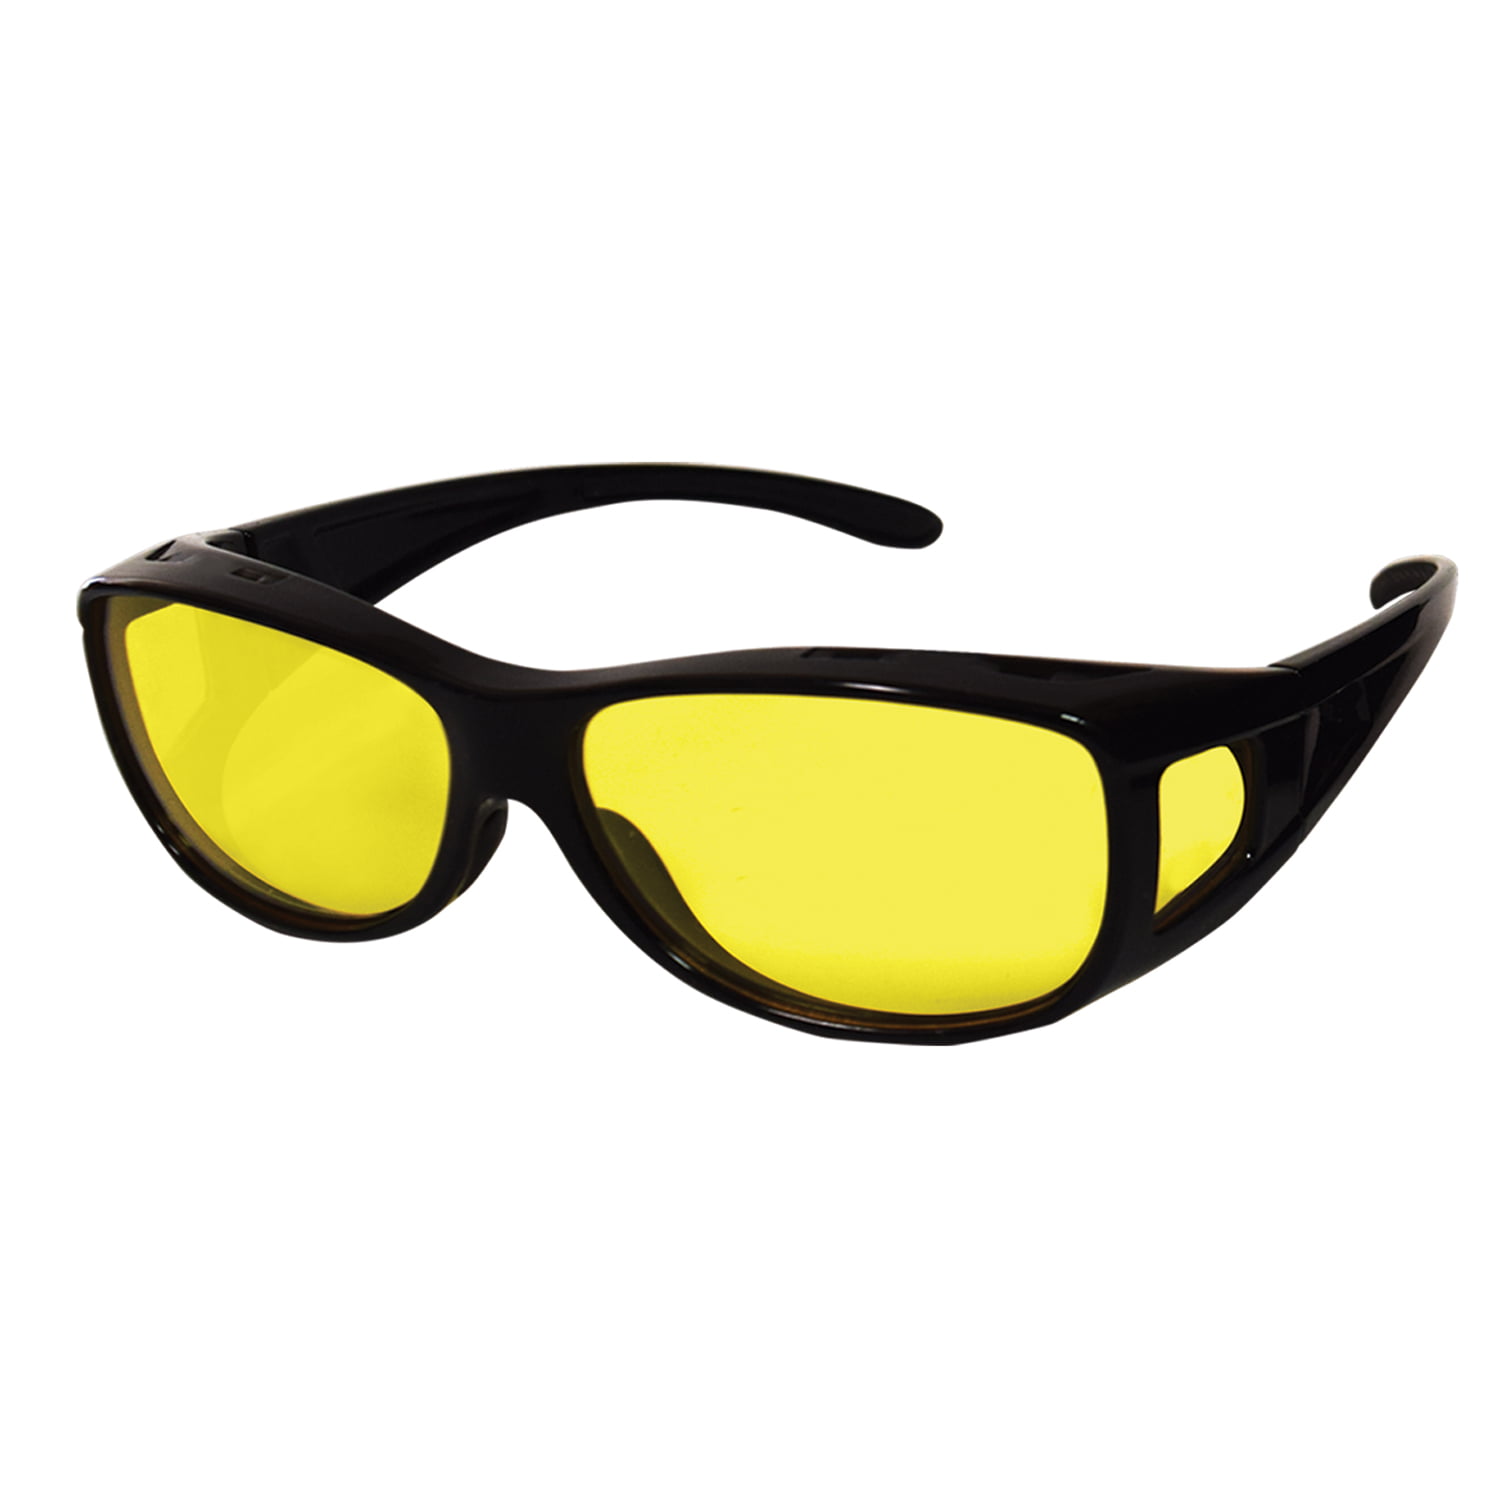 High Quality Night Vision Glasses _40%OFF NEW YEAR OFFER 2020 